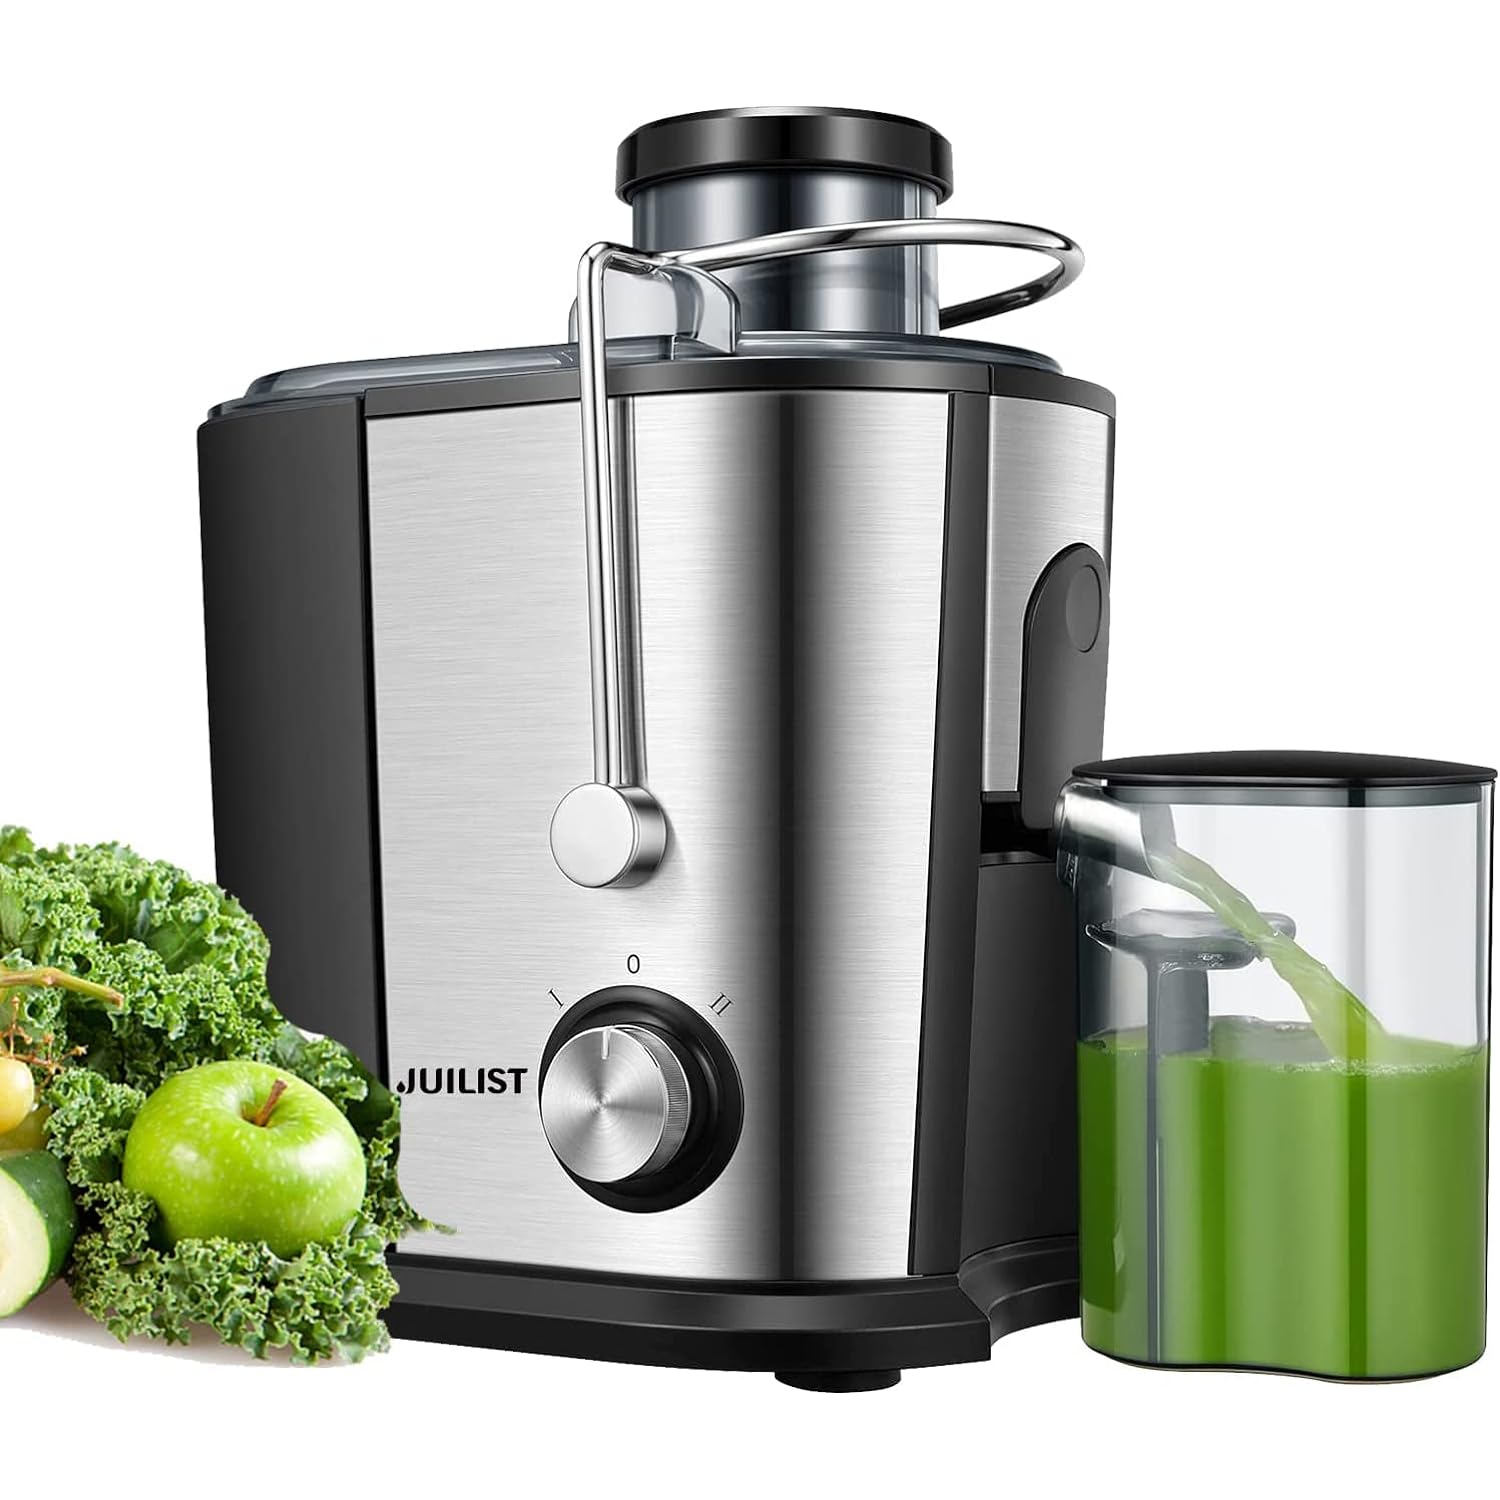 GCP Products Juicer Machines Easy to Clean 3 Feed Chute Juicer Extractor for Whole Vegetable and Fruit 2 Speeds Control